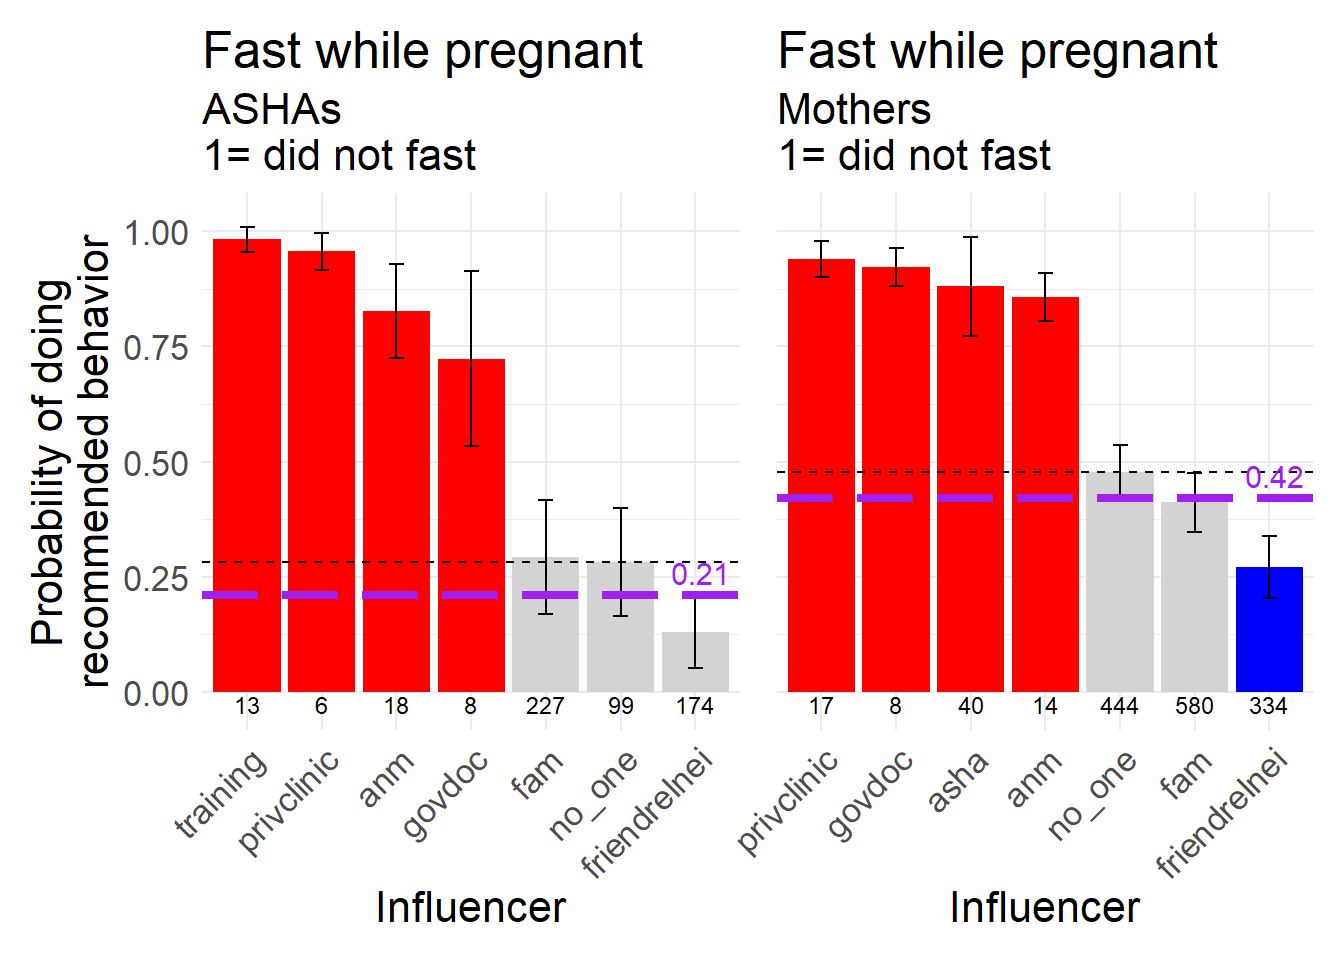 Fasting while pregnant, a behavior that is biomedically recommended NOT to do, 1 = did not fast, as opposed to fasting regularly or fasting only for festivals.